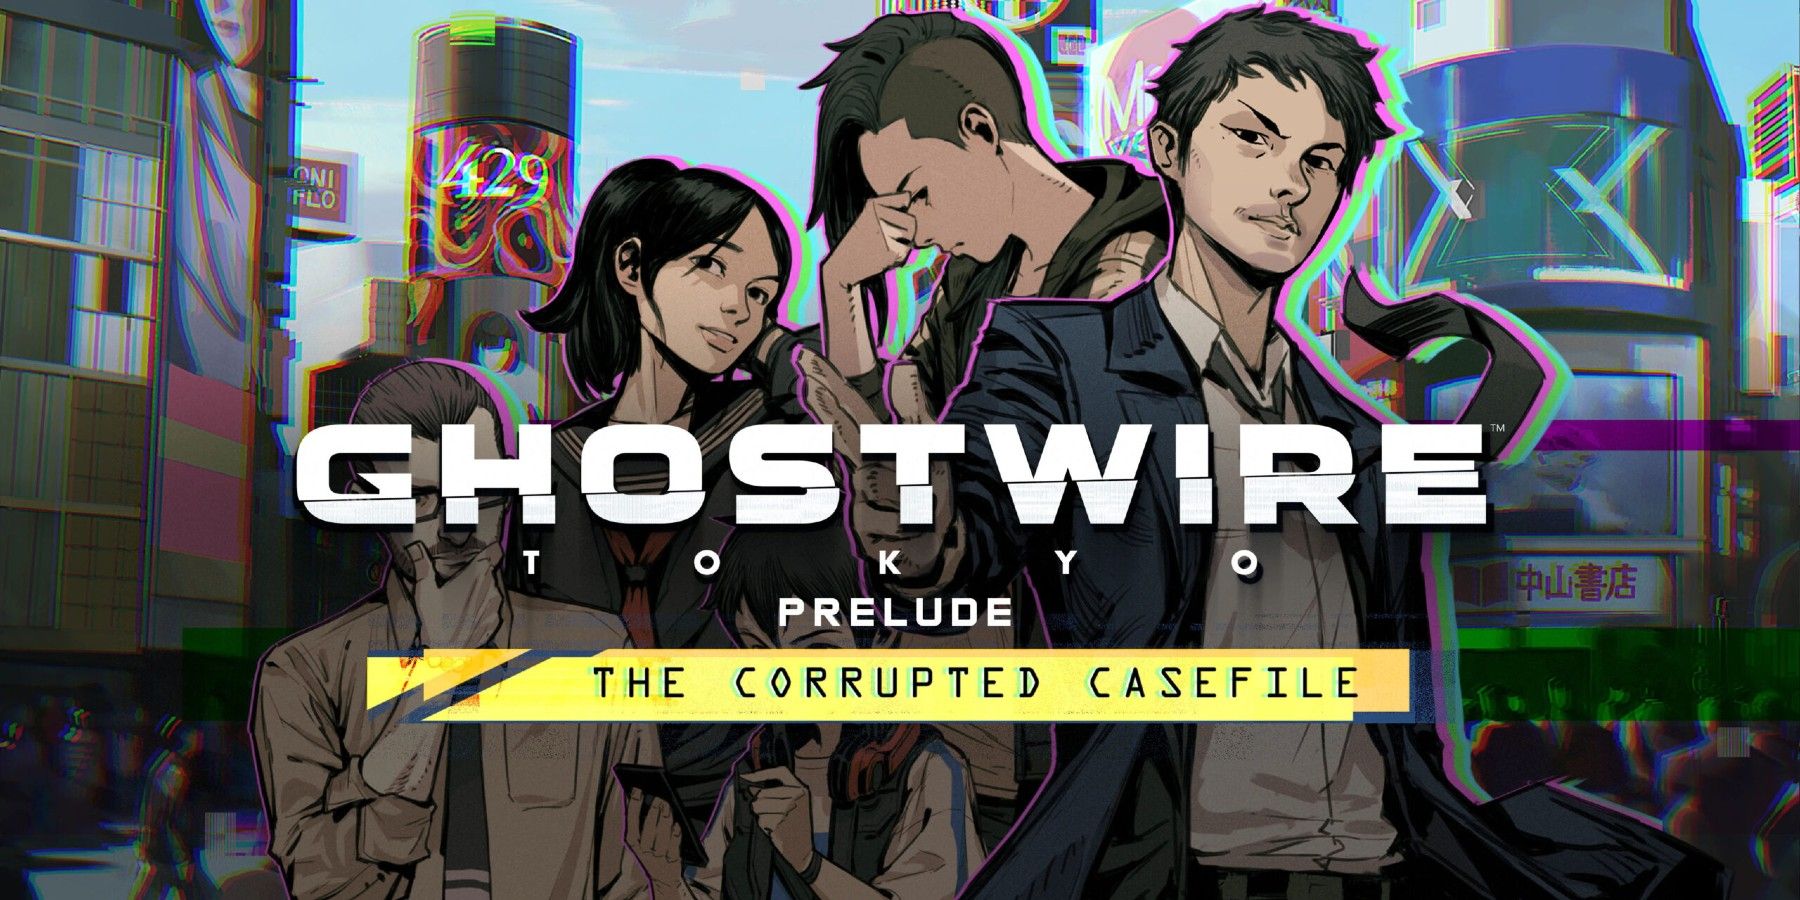 Ghostwire-Tokyo-Prelude-Visual-Novel-Announced-PS4-PS5